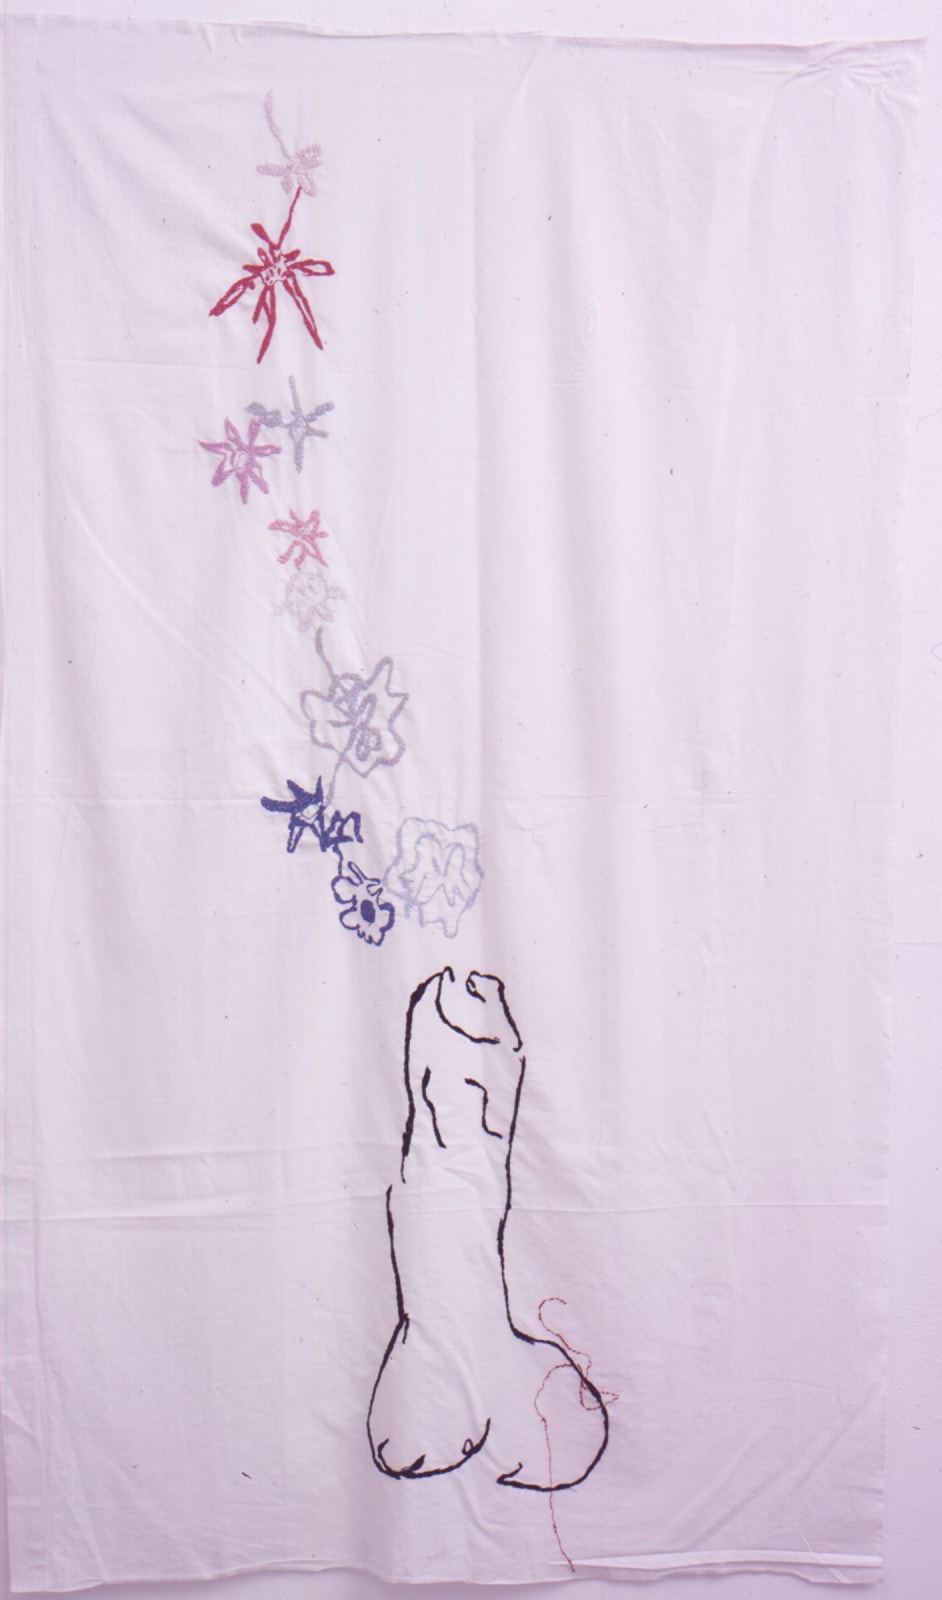 TRACEY EMIN, Beautiful Penis, 2002Eembroidery on white bed sheet